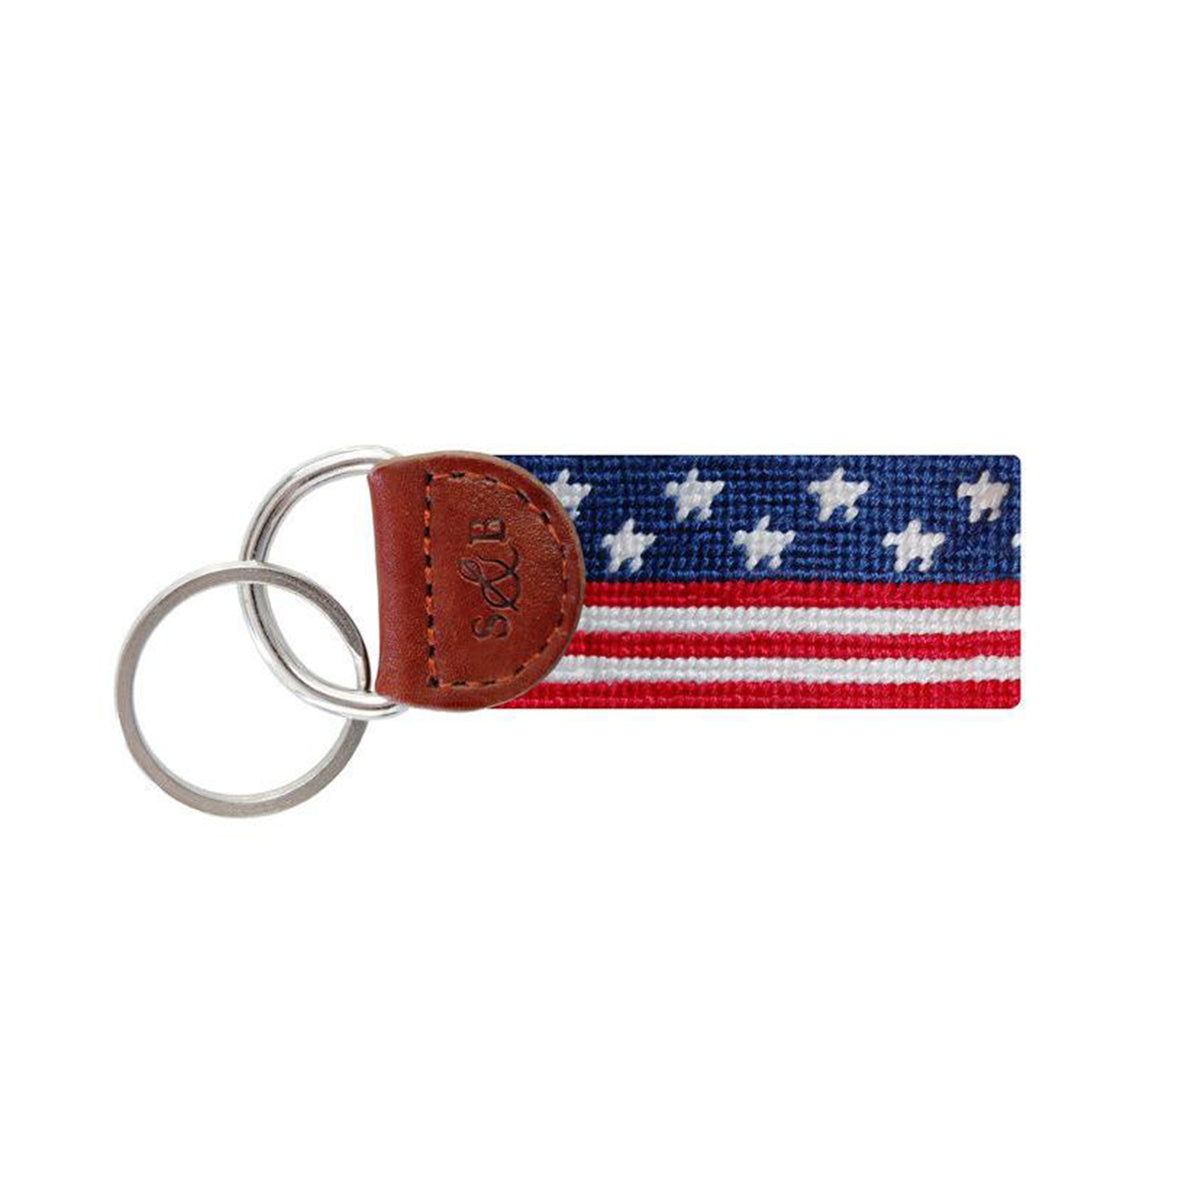 Old Glory Key Fob - All She Wrote